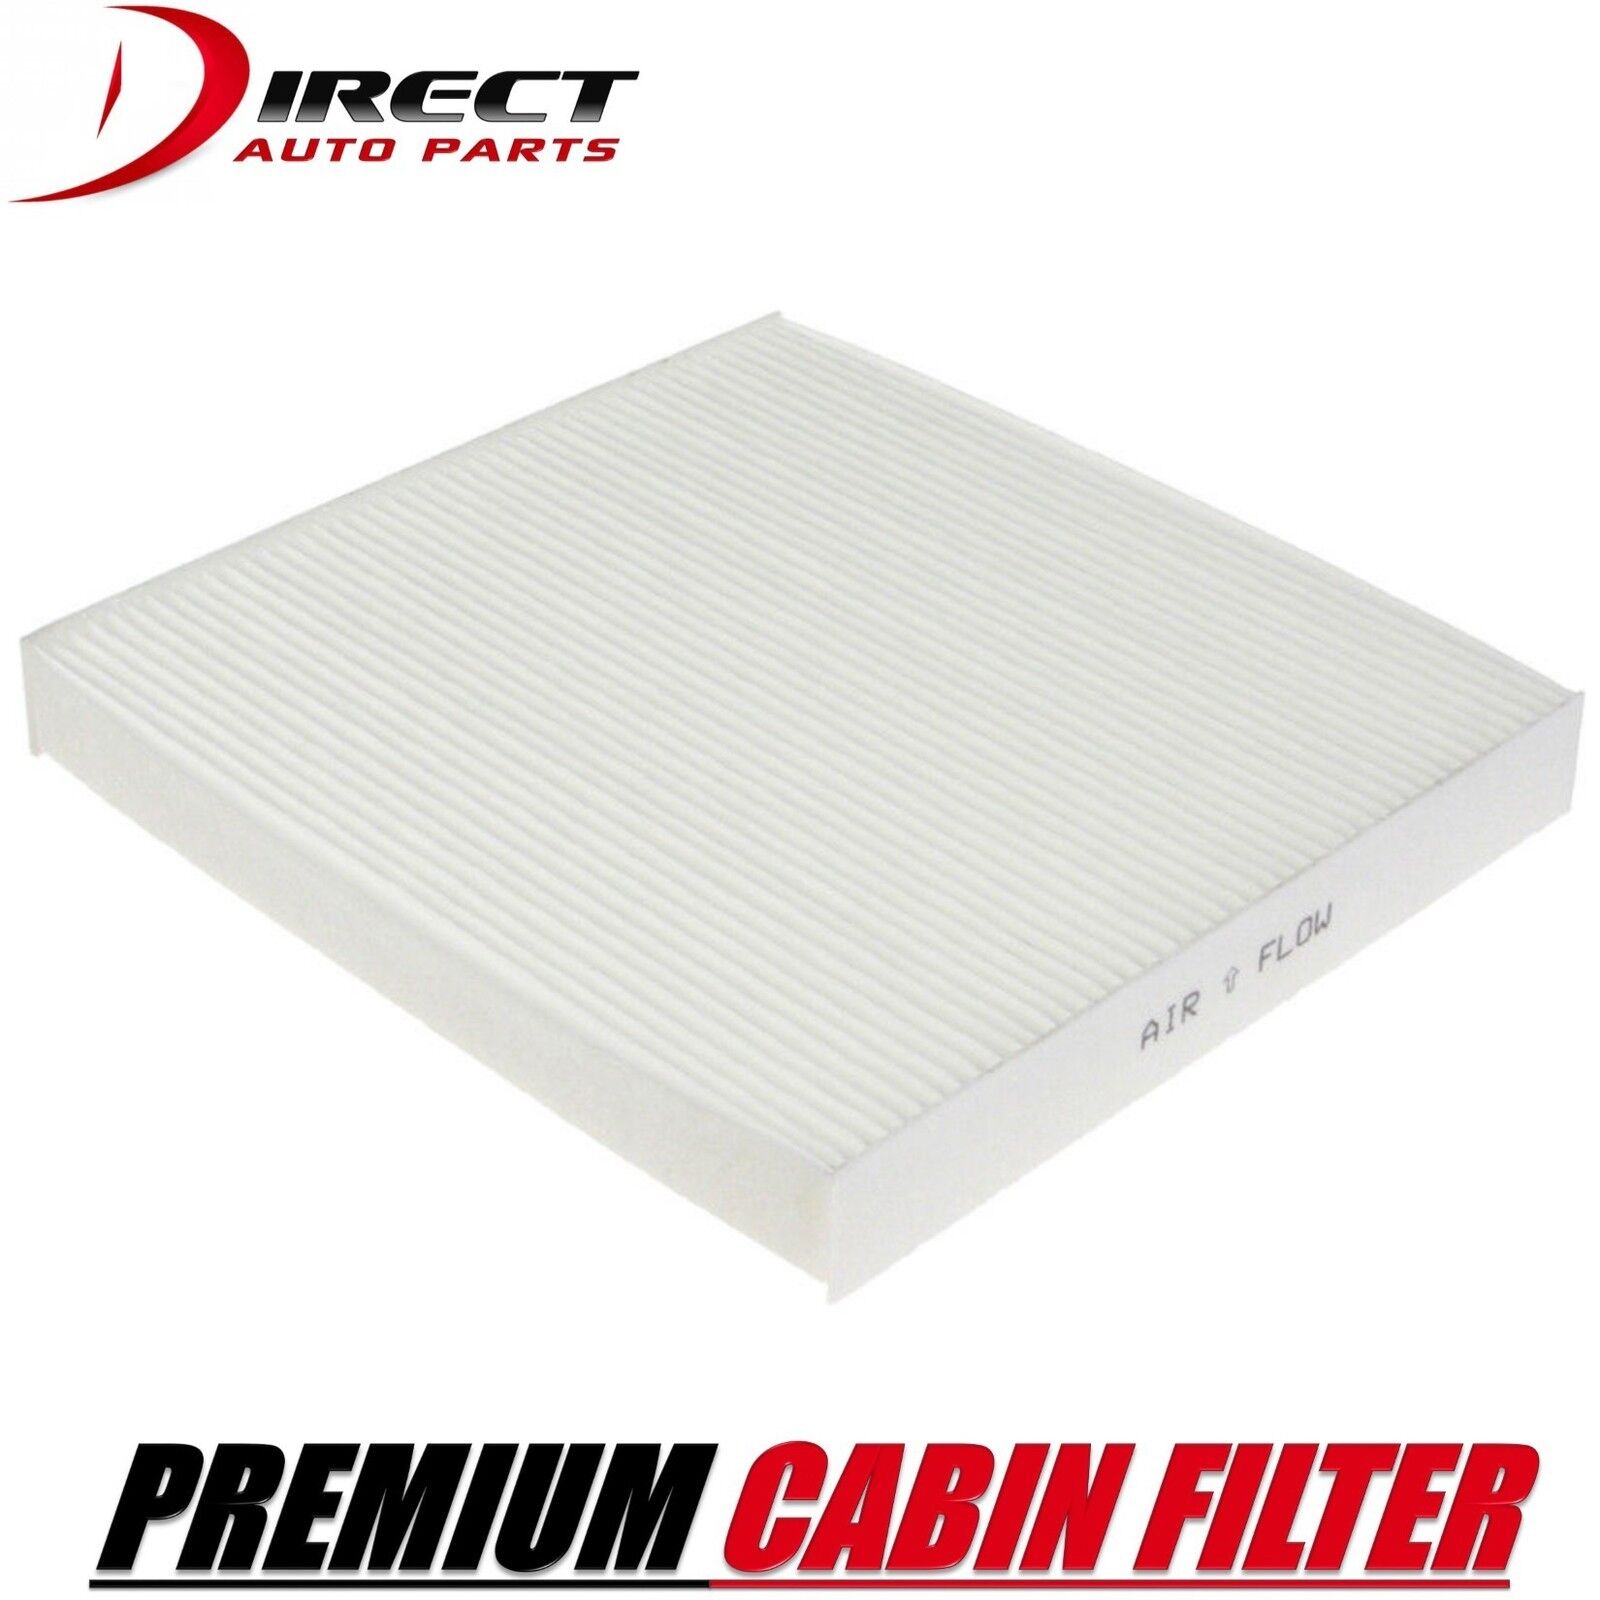 NISSAN CABIN AIR FILTER FOR NISSAN QUEST 2011 - 2017